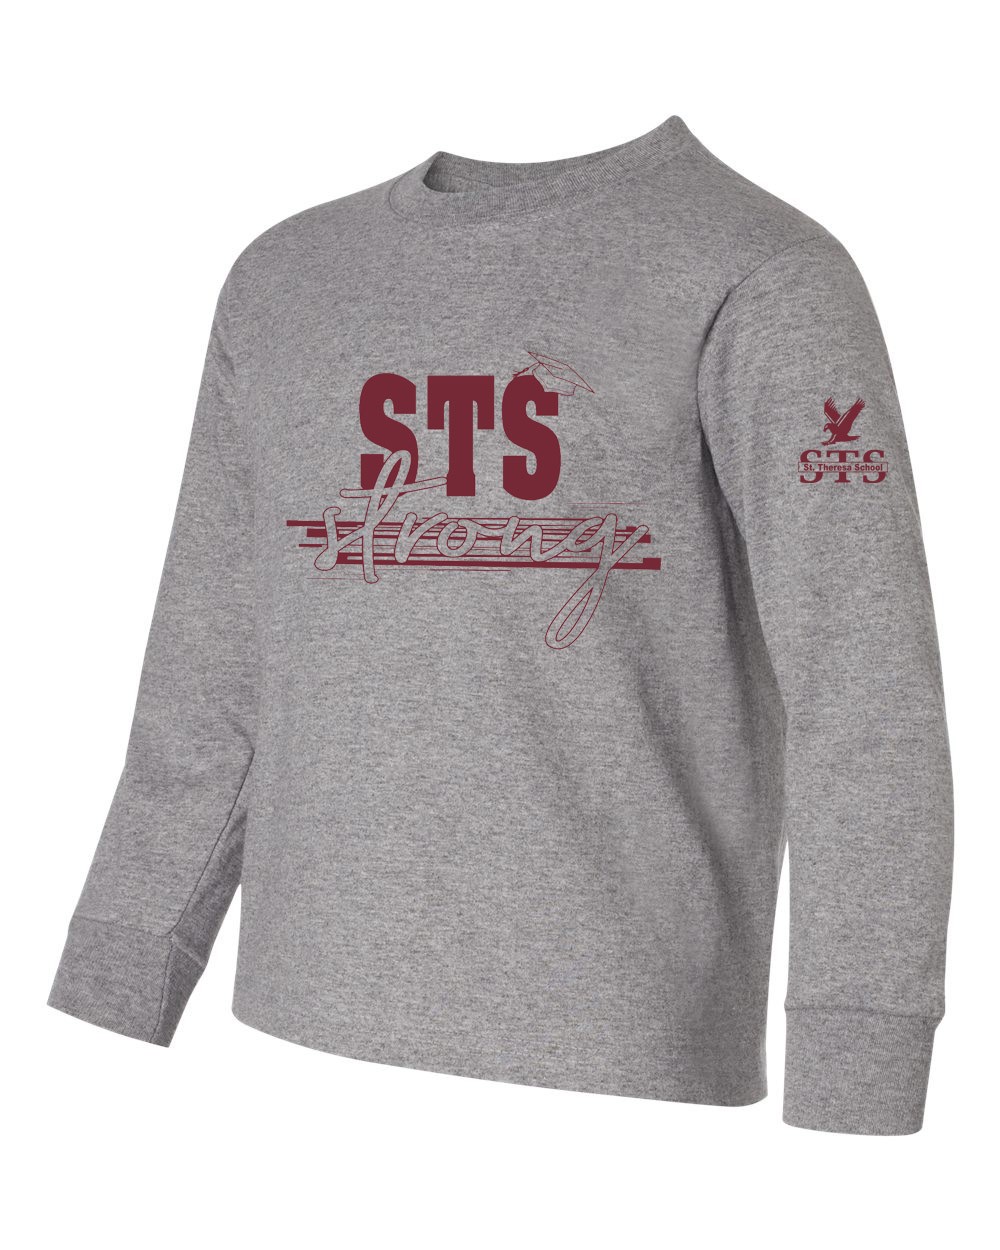 STS L/S Strong Spirit T-Shirt w/ Maroon Logo - Please Allow 2-3 Weeks for Delivery